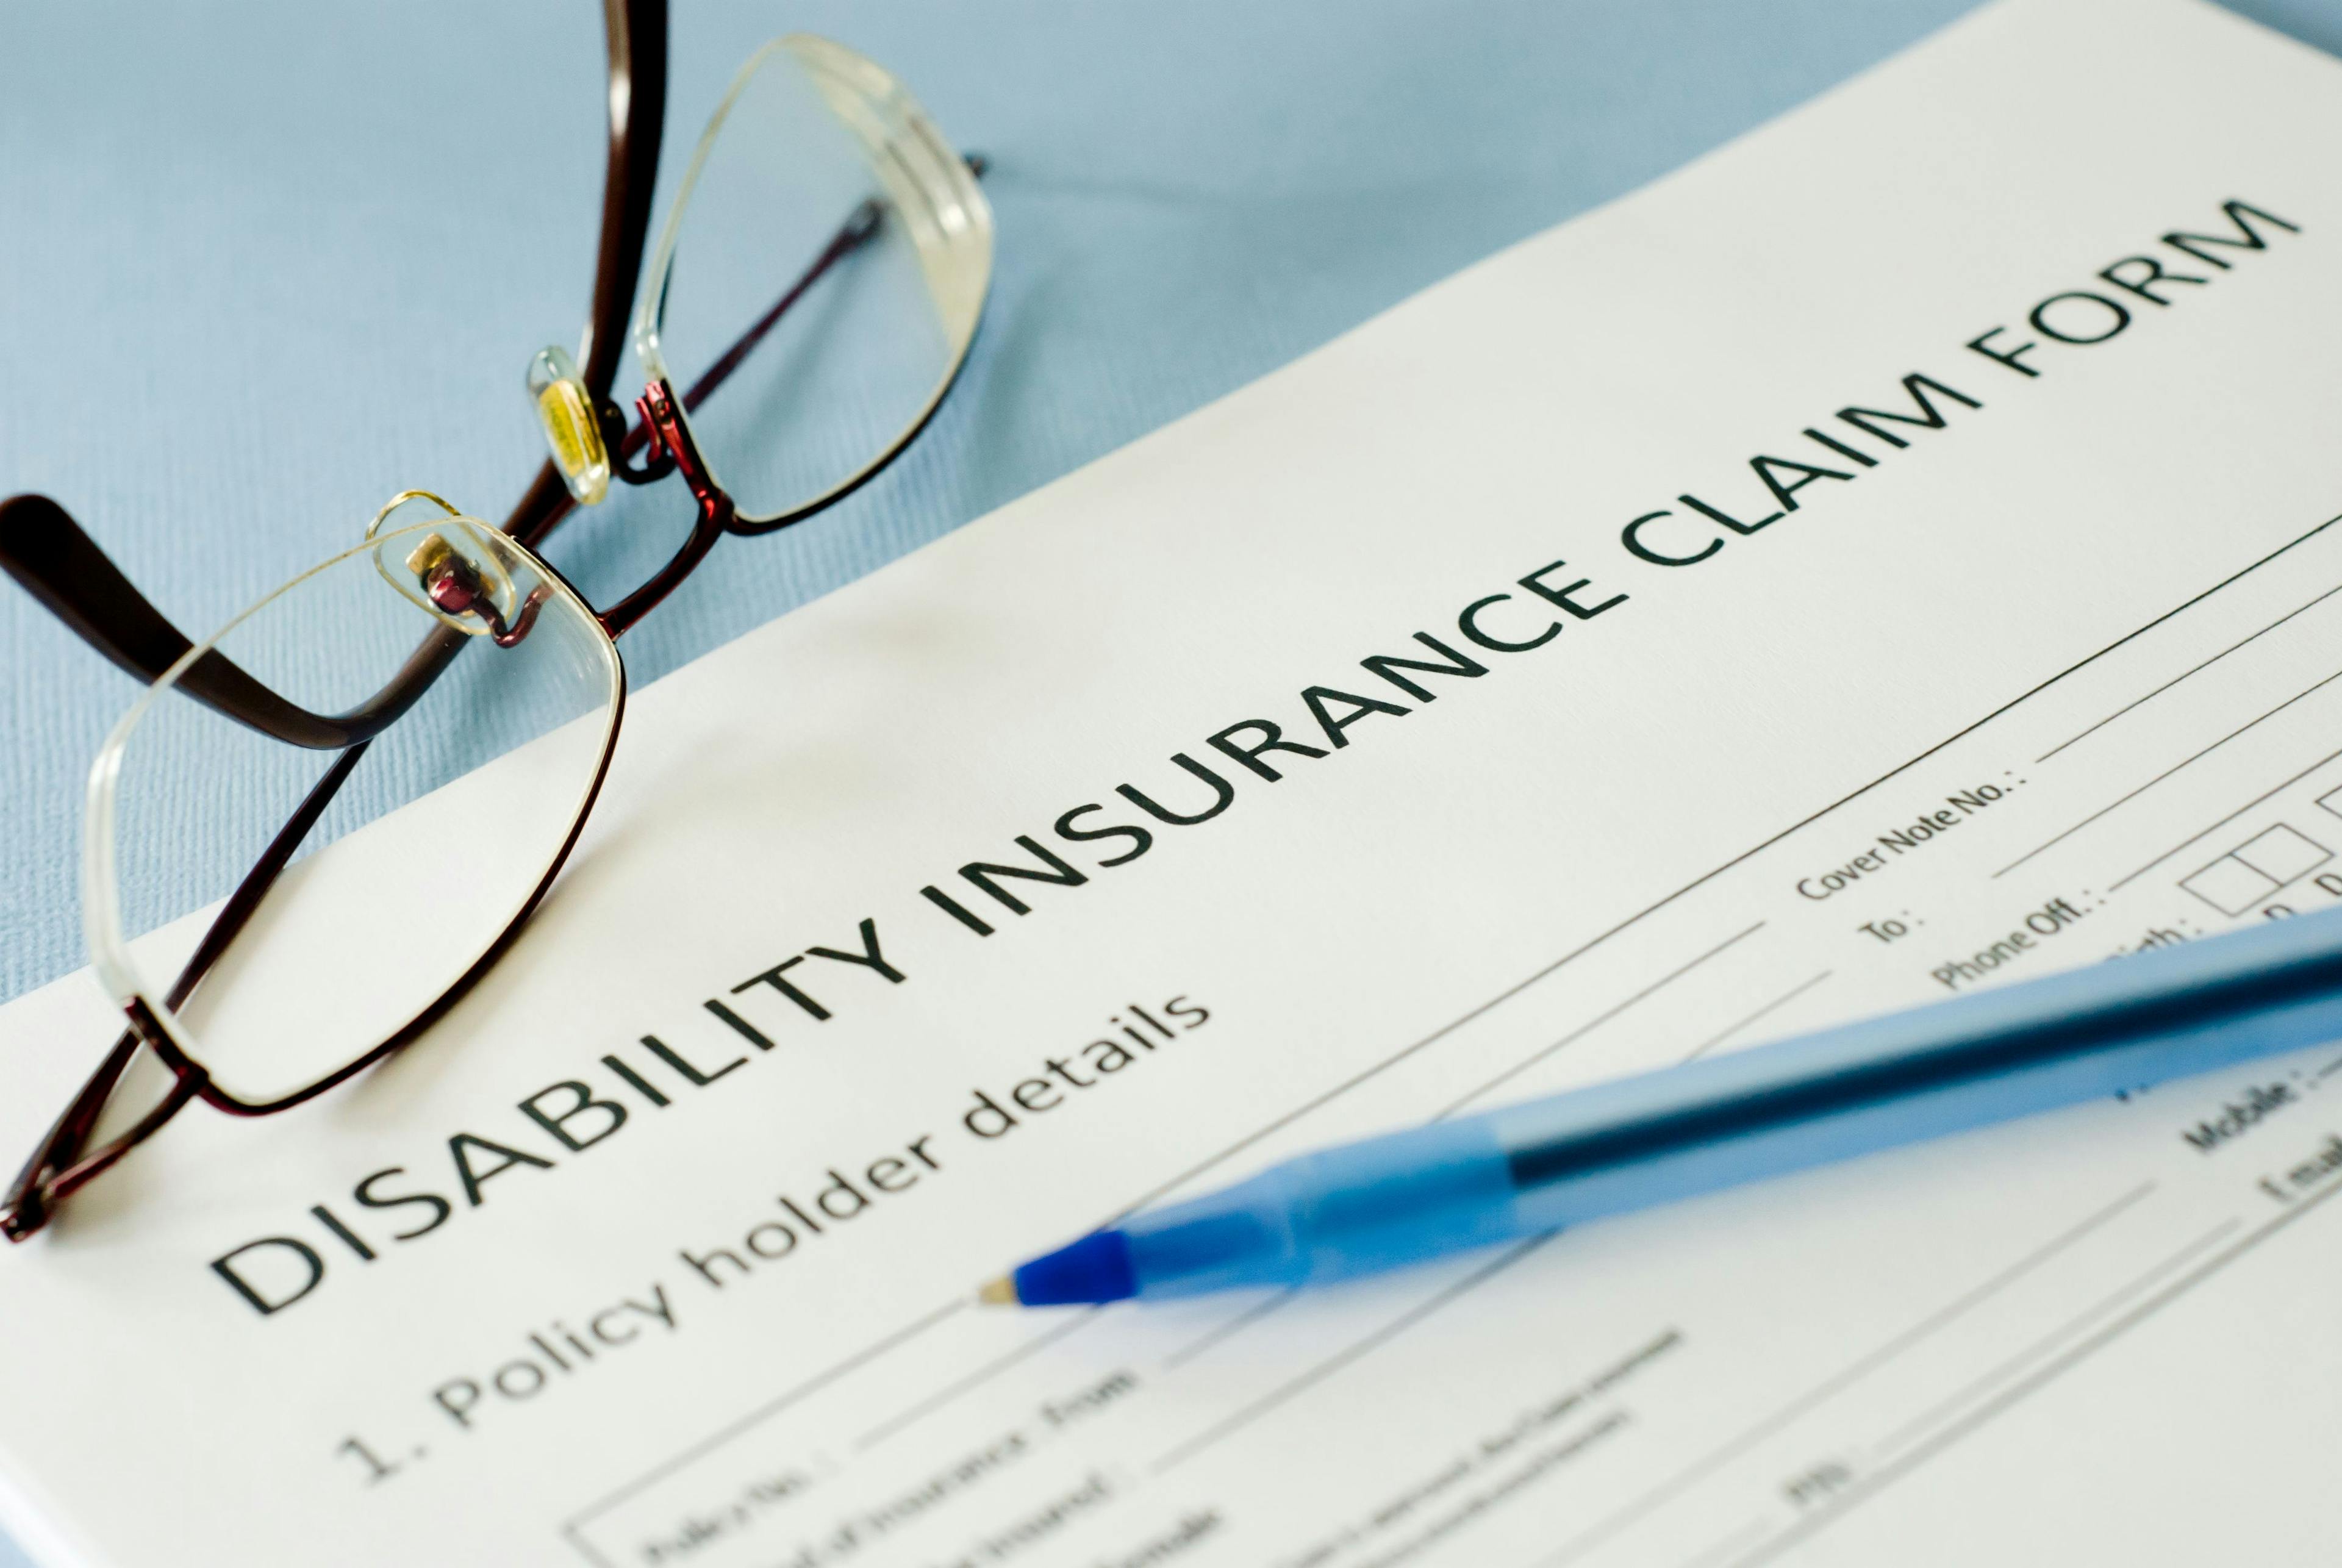 Disability insurance is a must for physicians: ©Emilie Zhang - stock.adobe.com